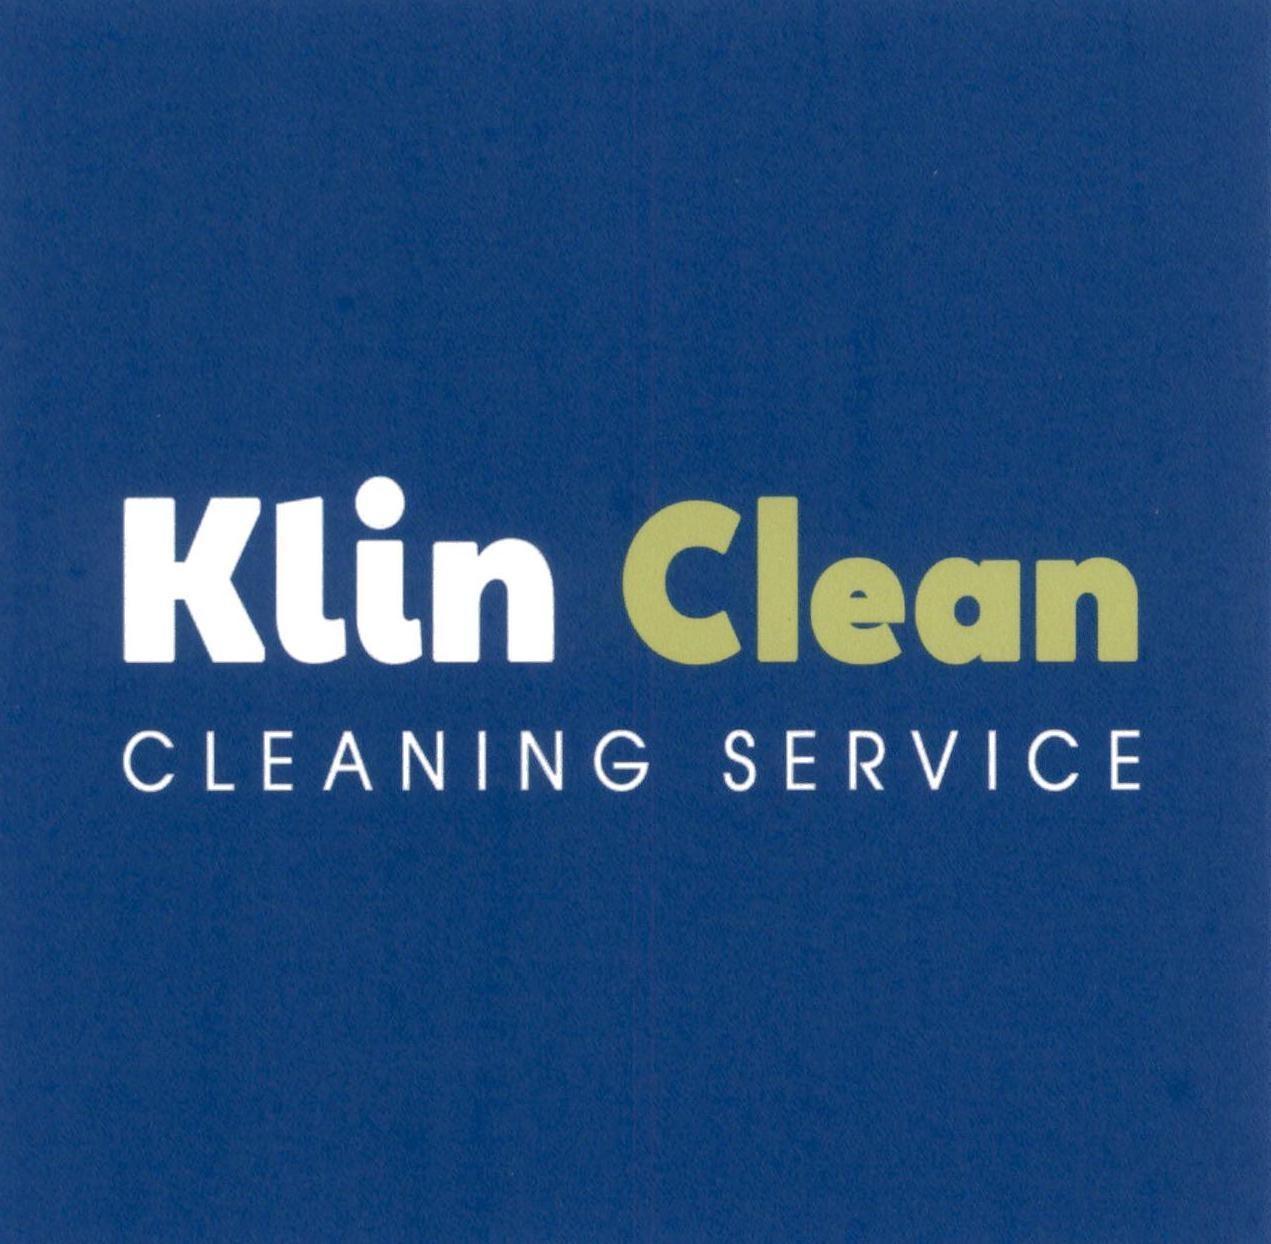 Klin Clean CLEANING SERVICE